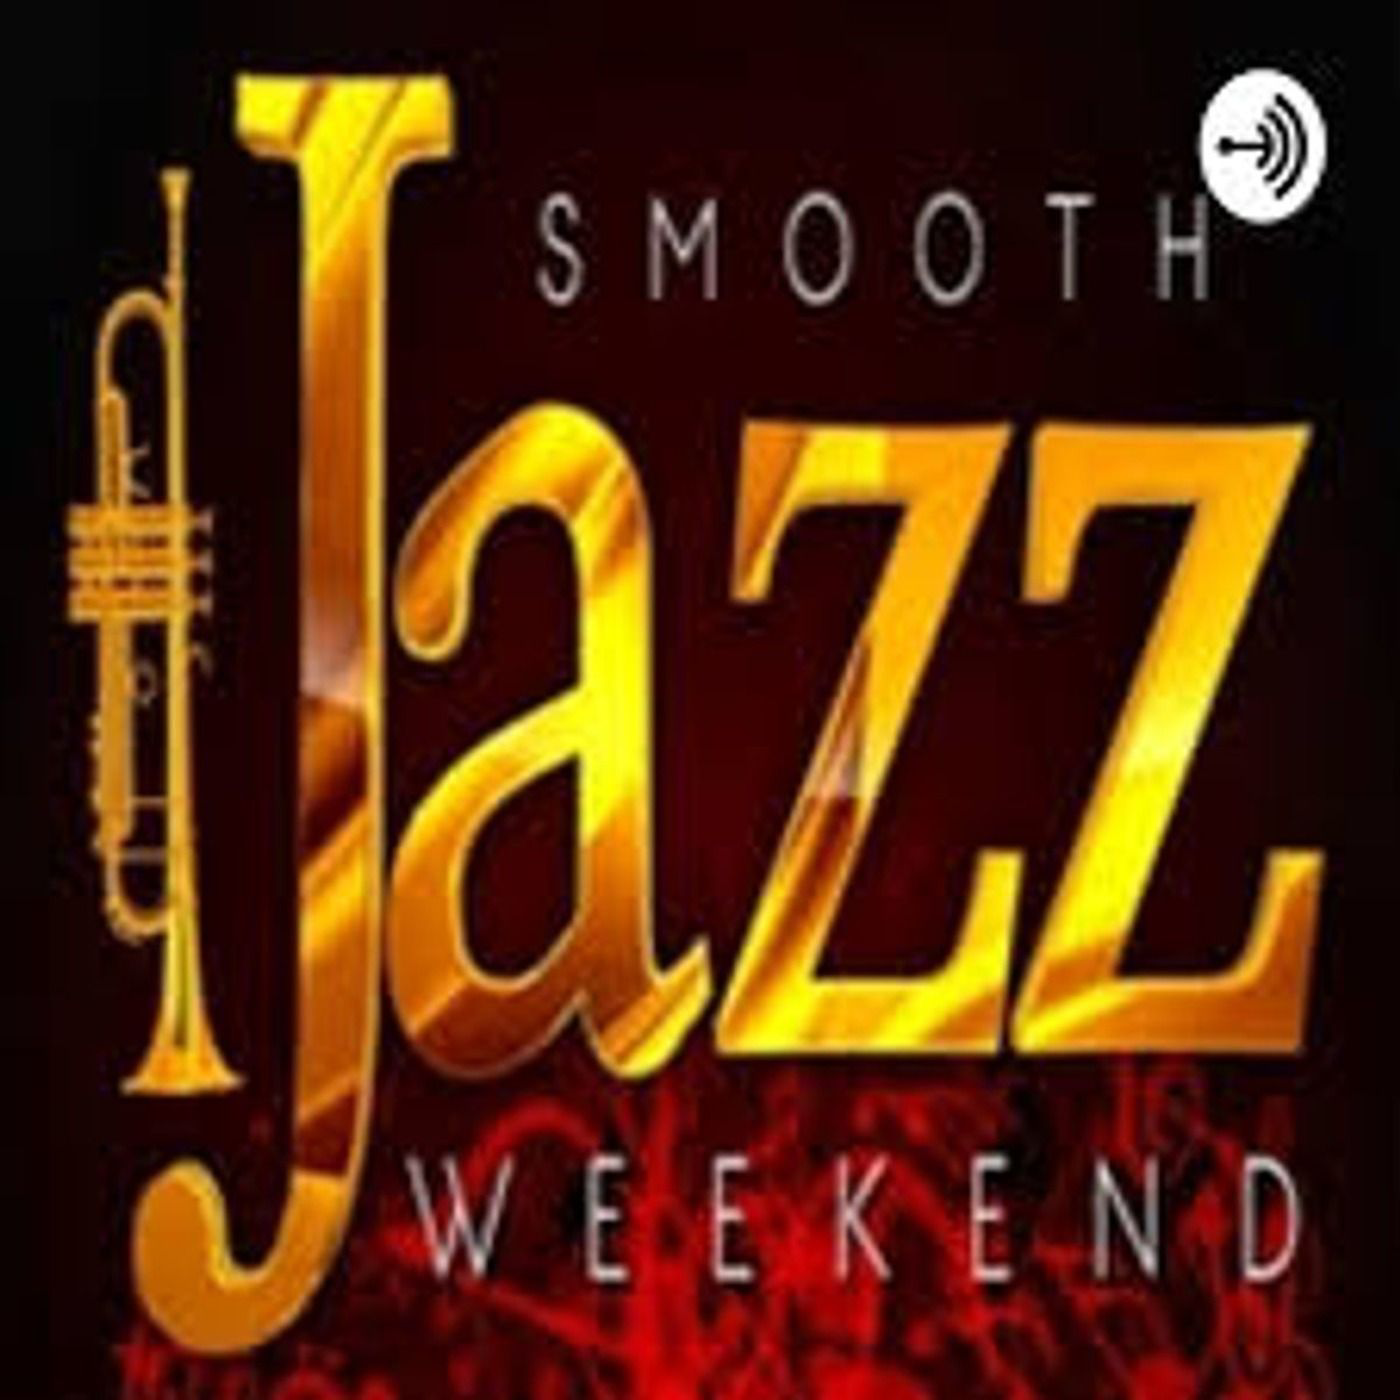 A highlight from Smooth Jazz Weekend with Tina E. (Think of You)